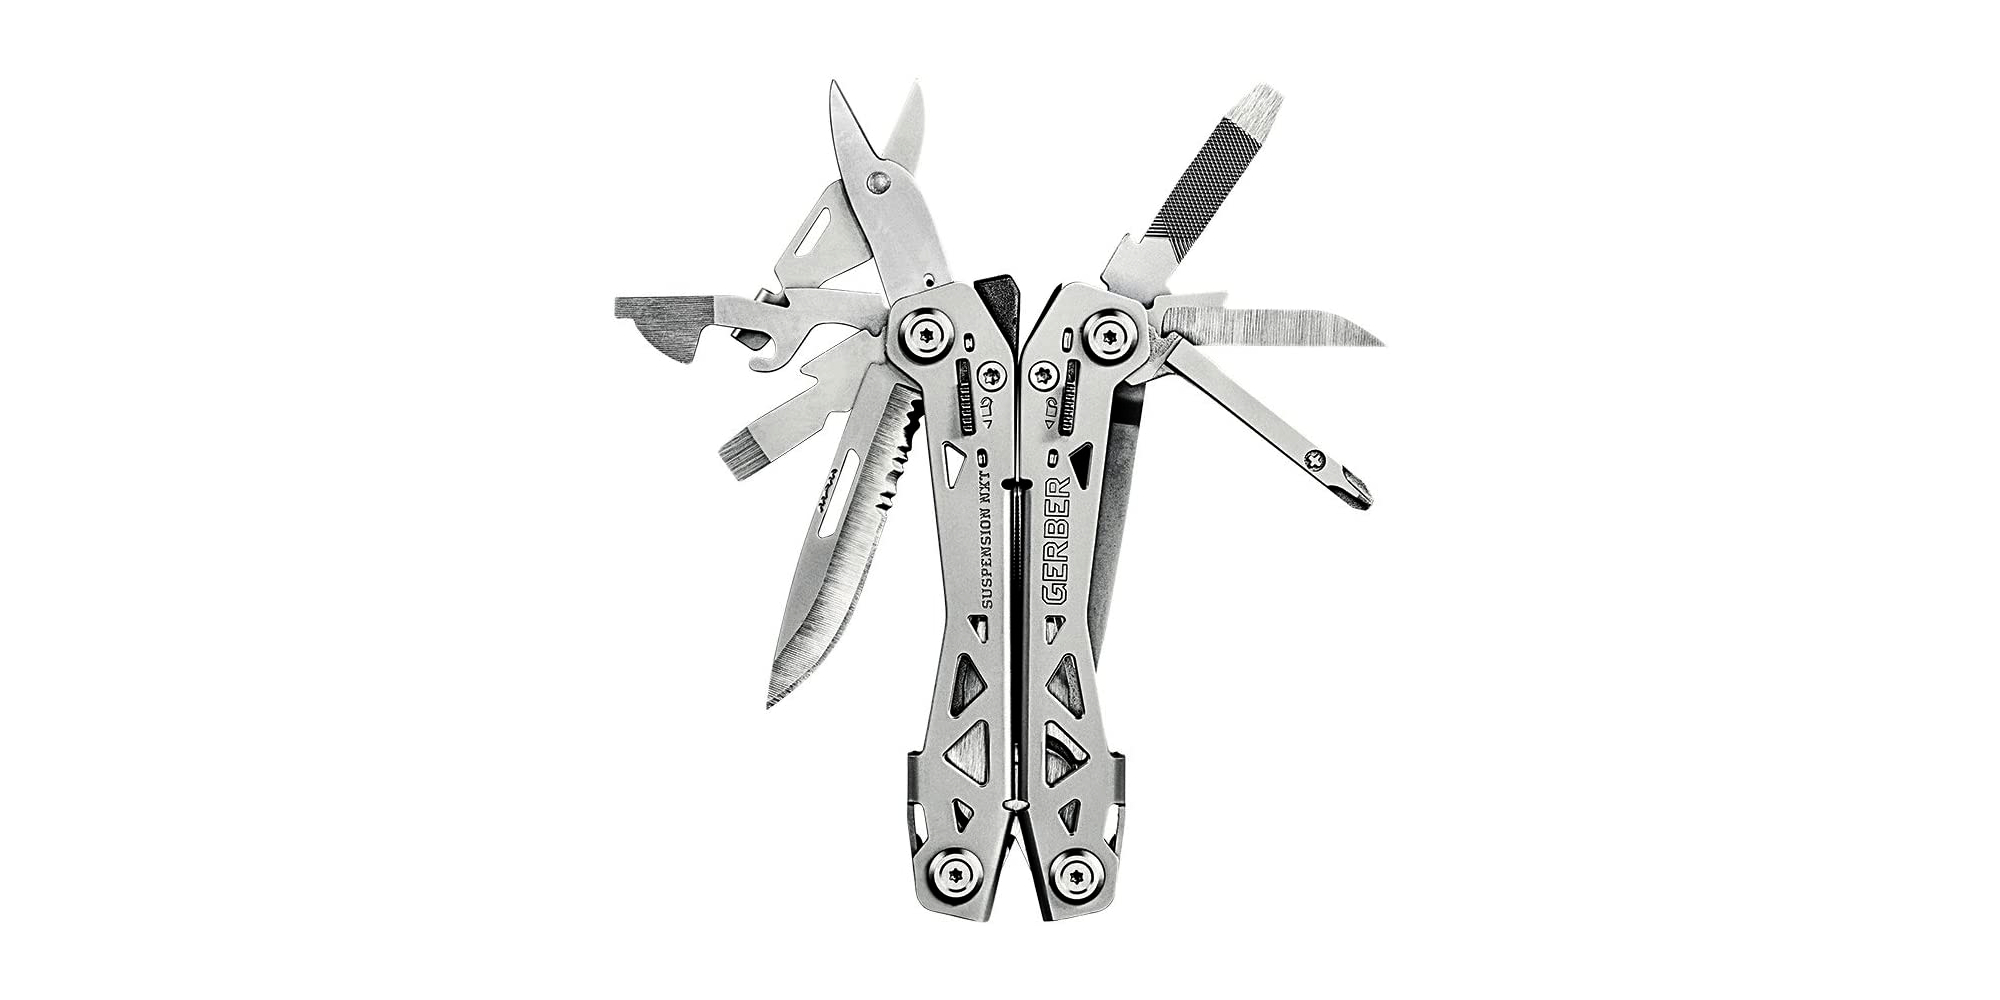 Slide Gerber's Suspension-NXT 15-in-1 Multi-Tool in your pocket for $23